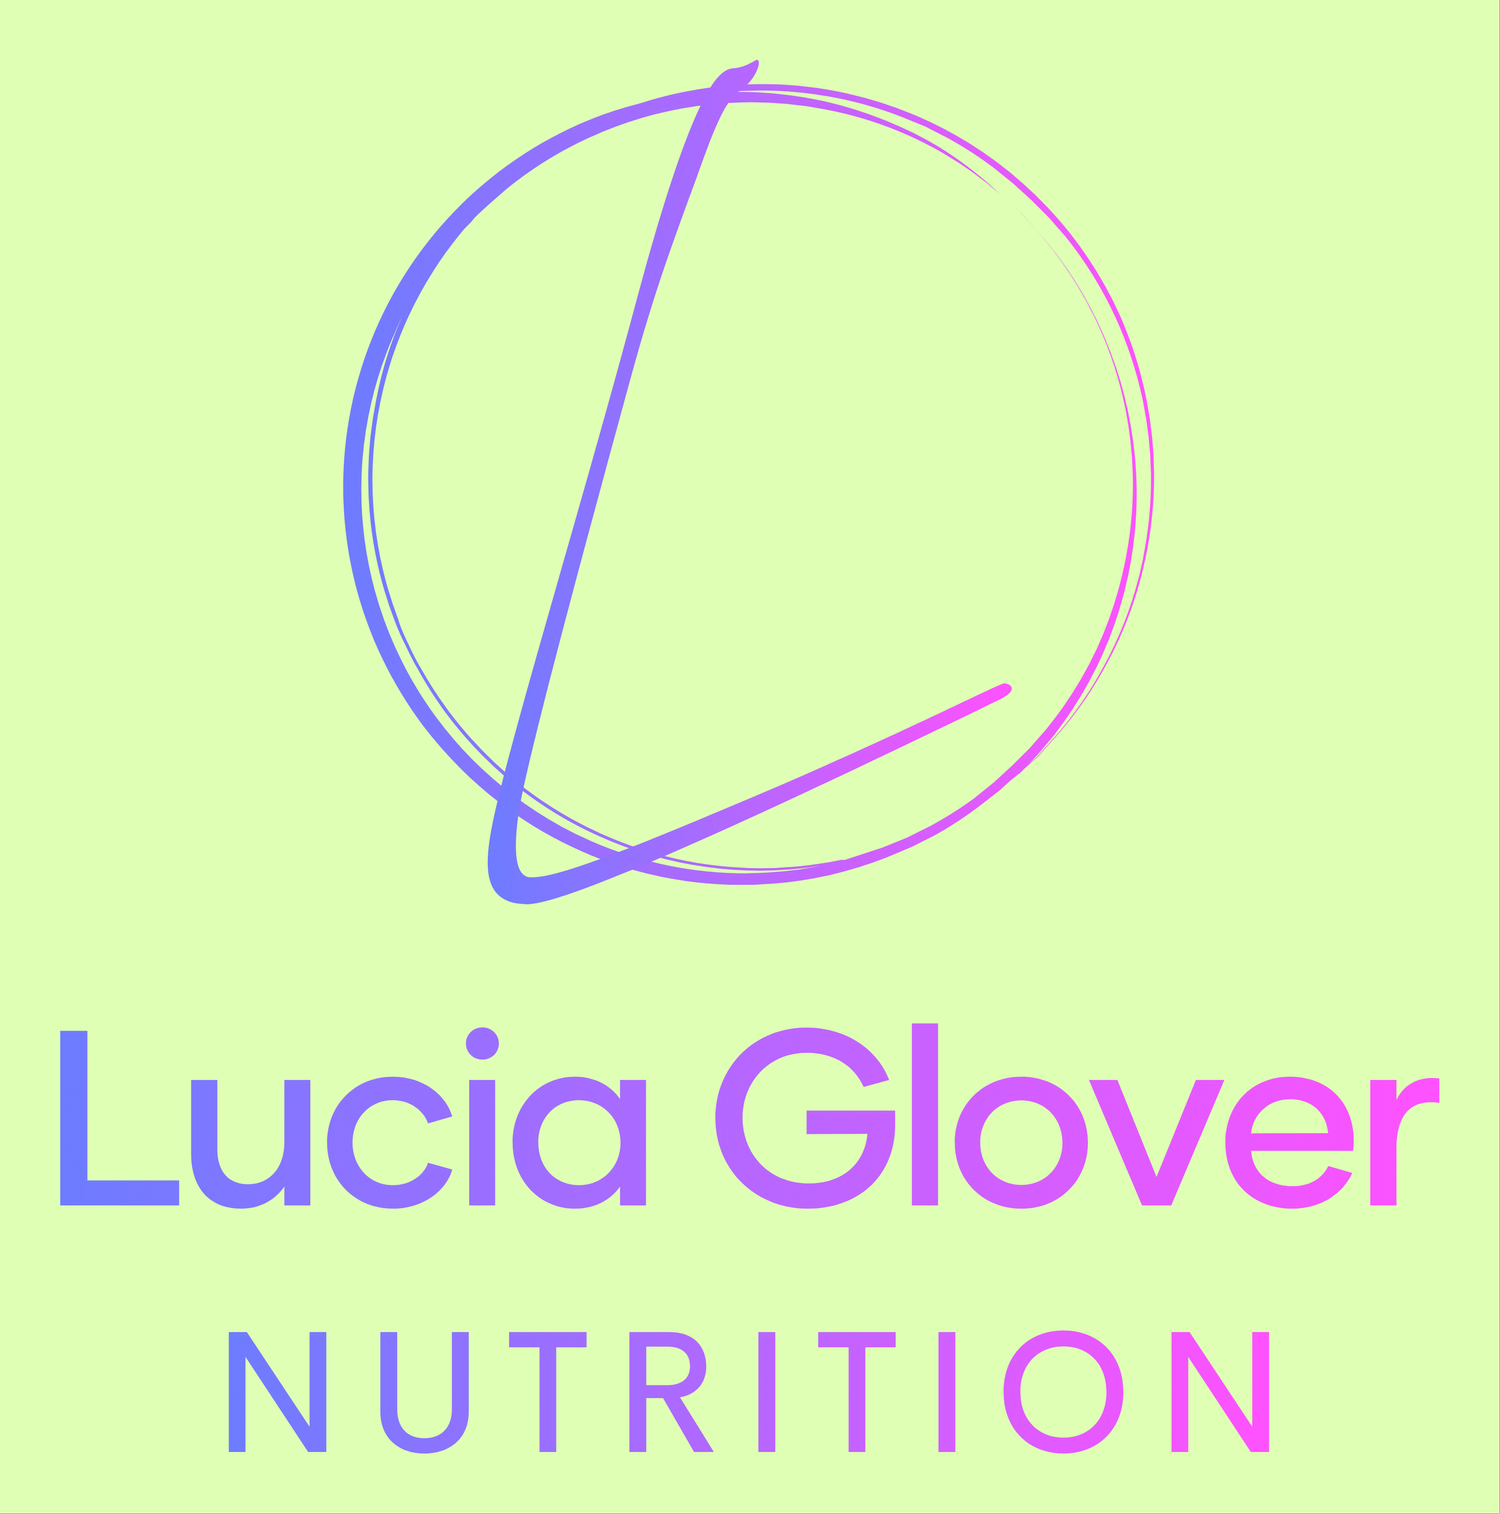 Lucia Glover Nutrition